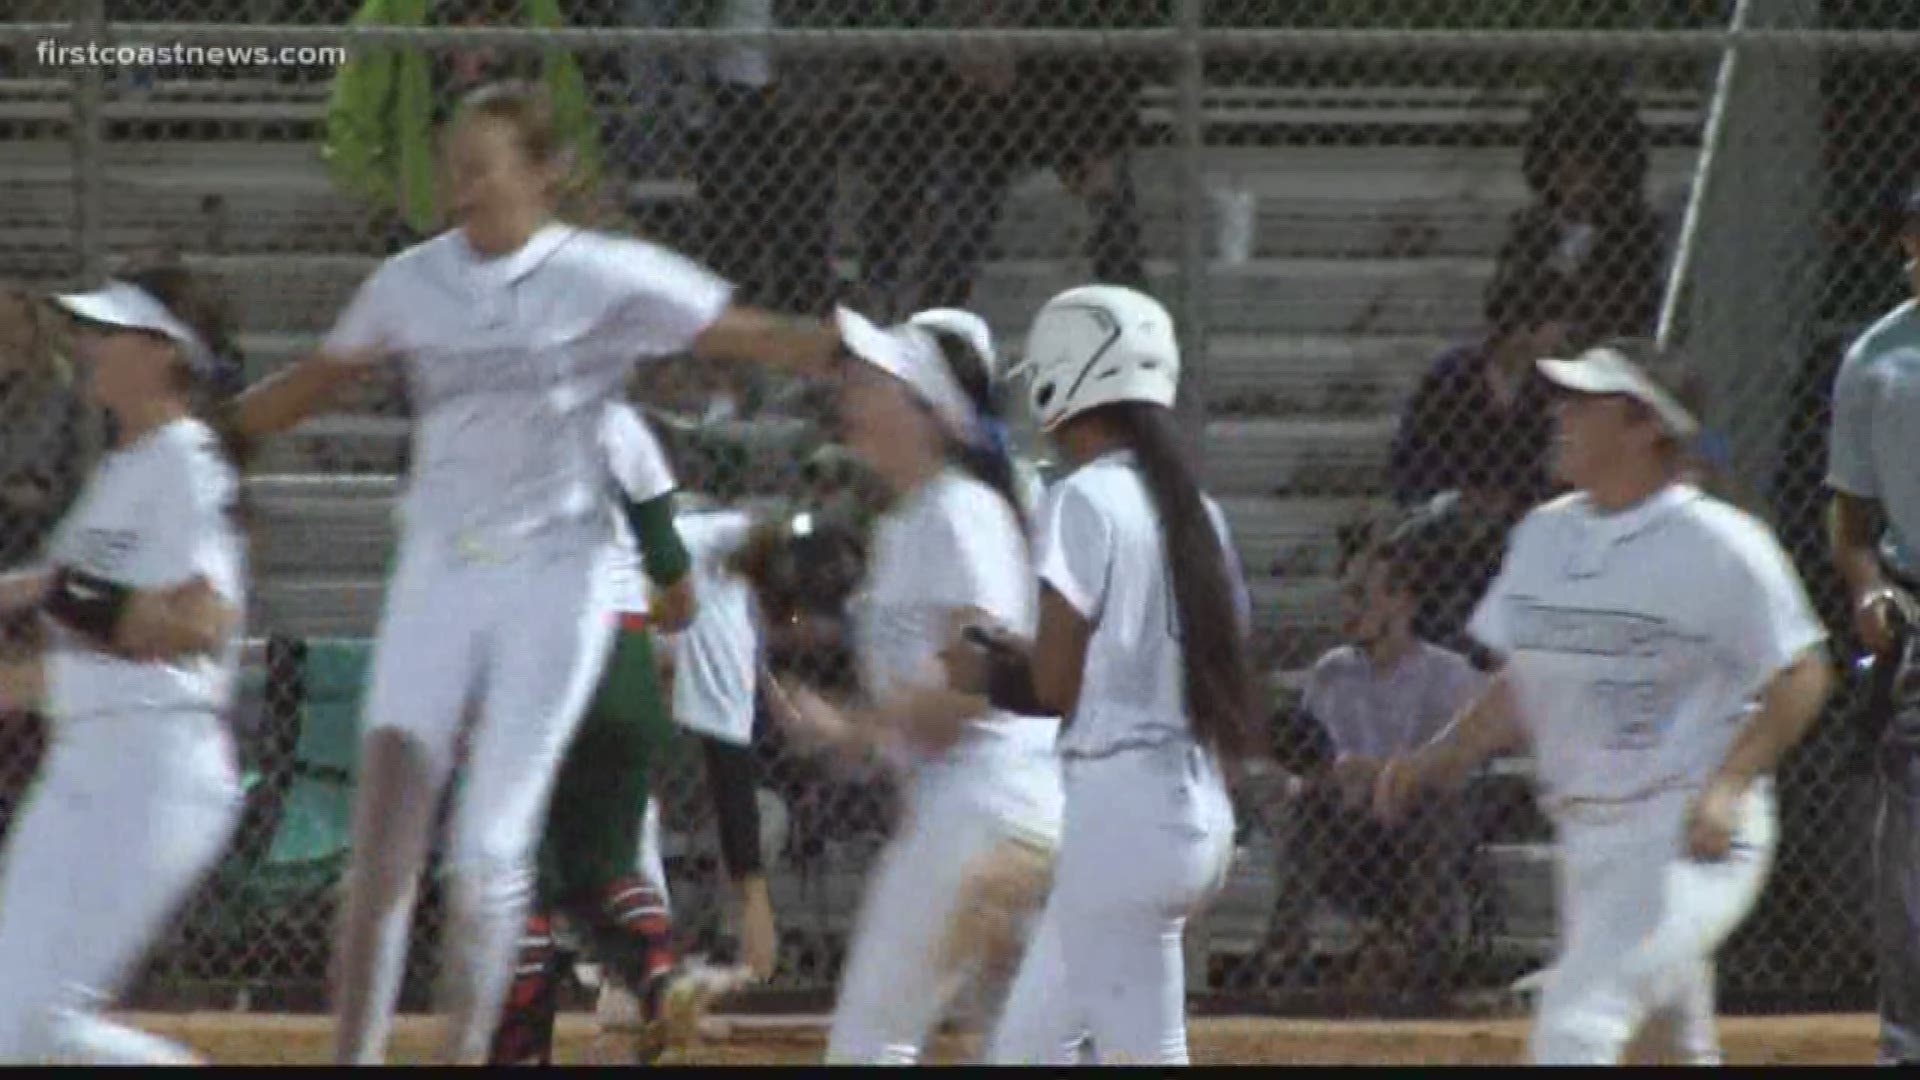 Nationally-ranked Oakleaf needed extra innings, but they escape with a 4-3 win over previously unbeaten Mandarin.